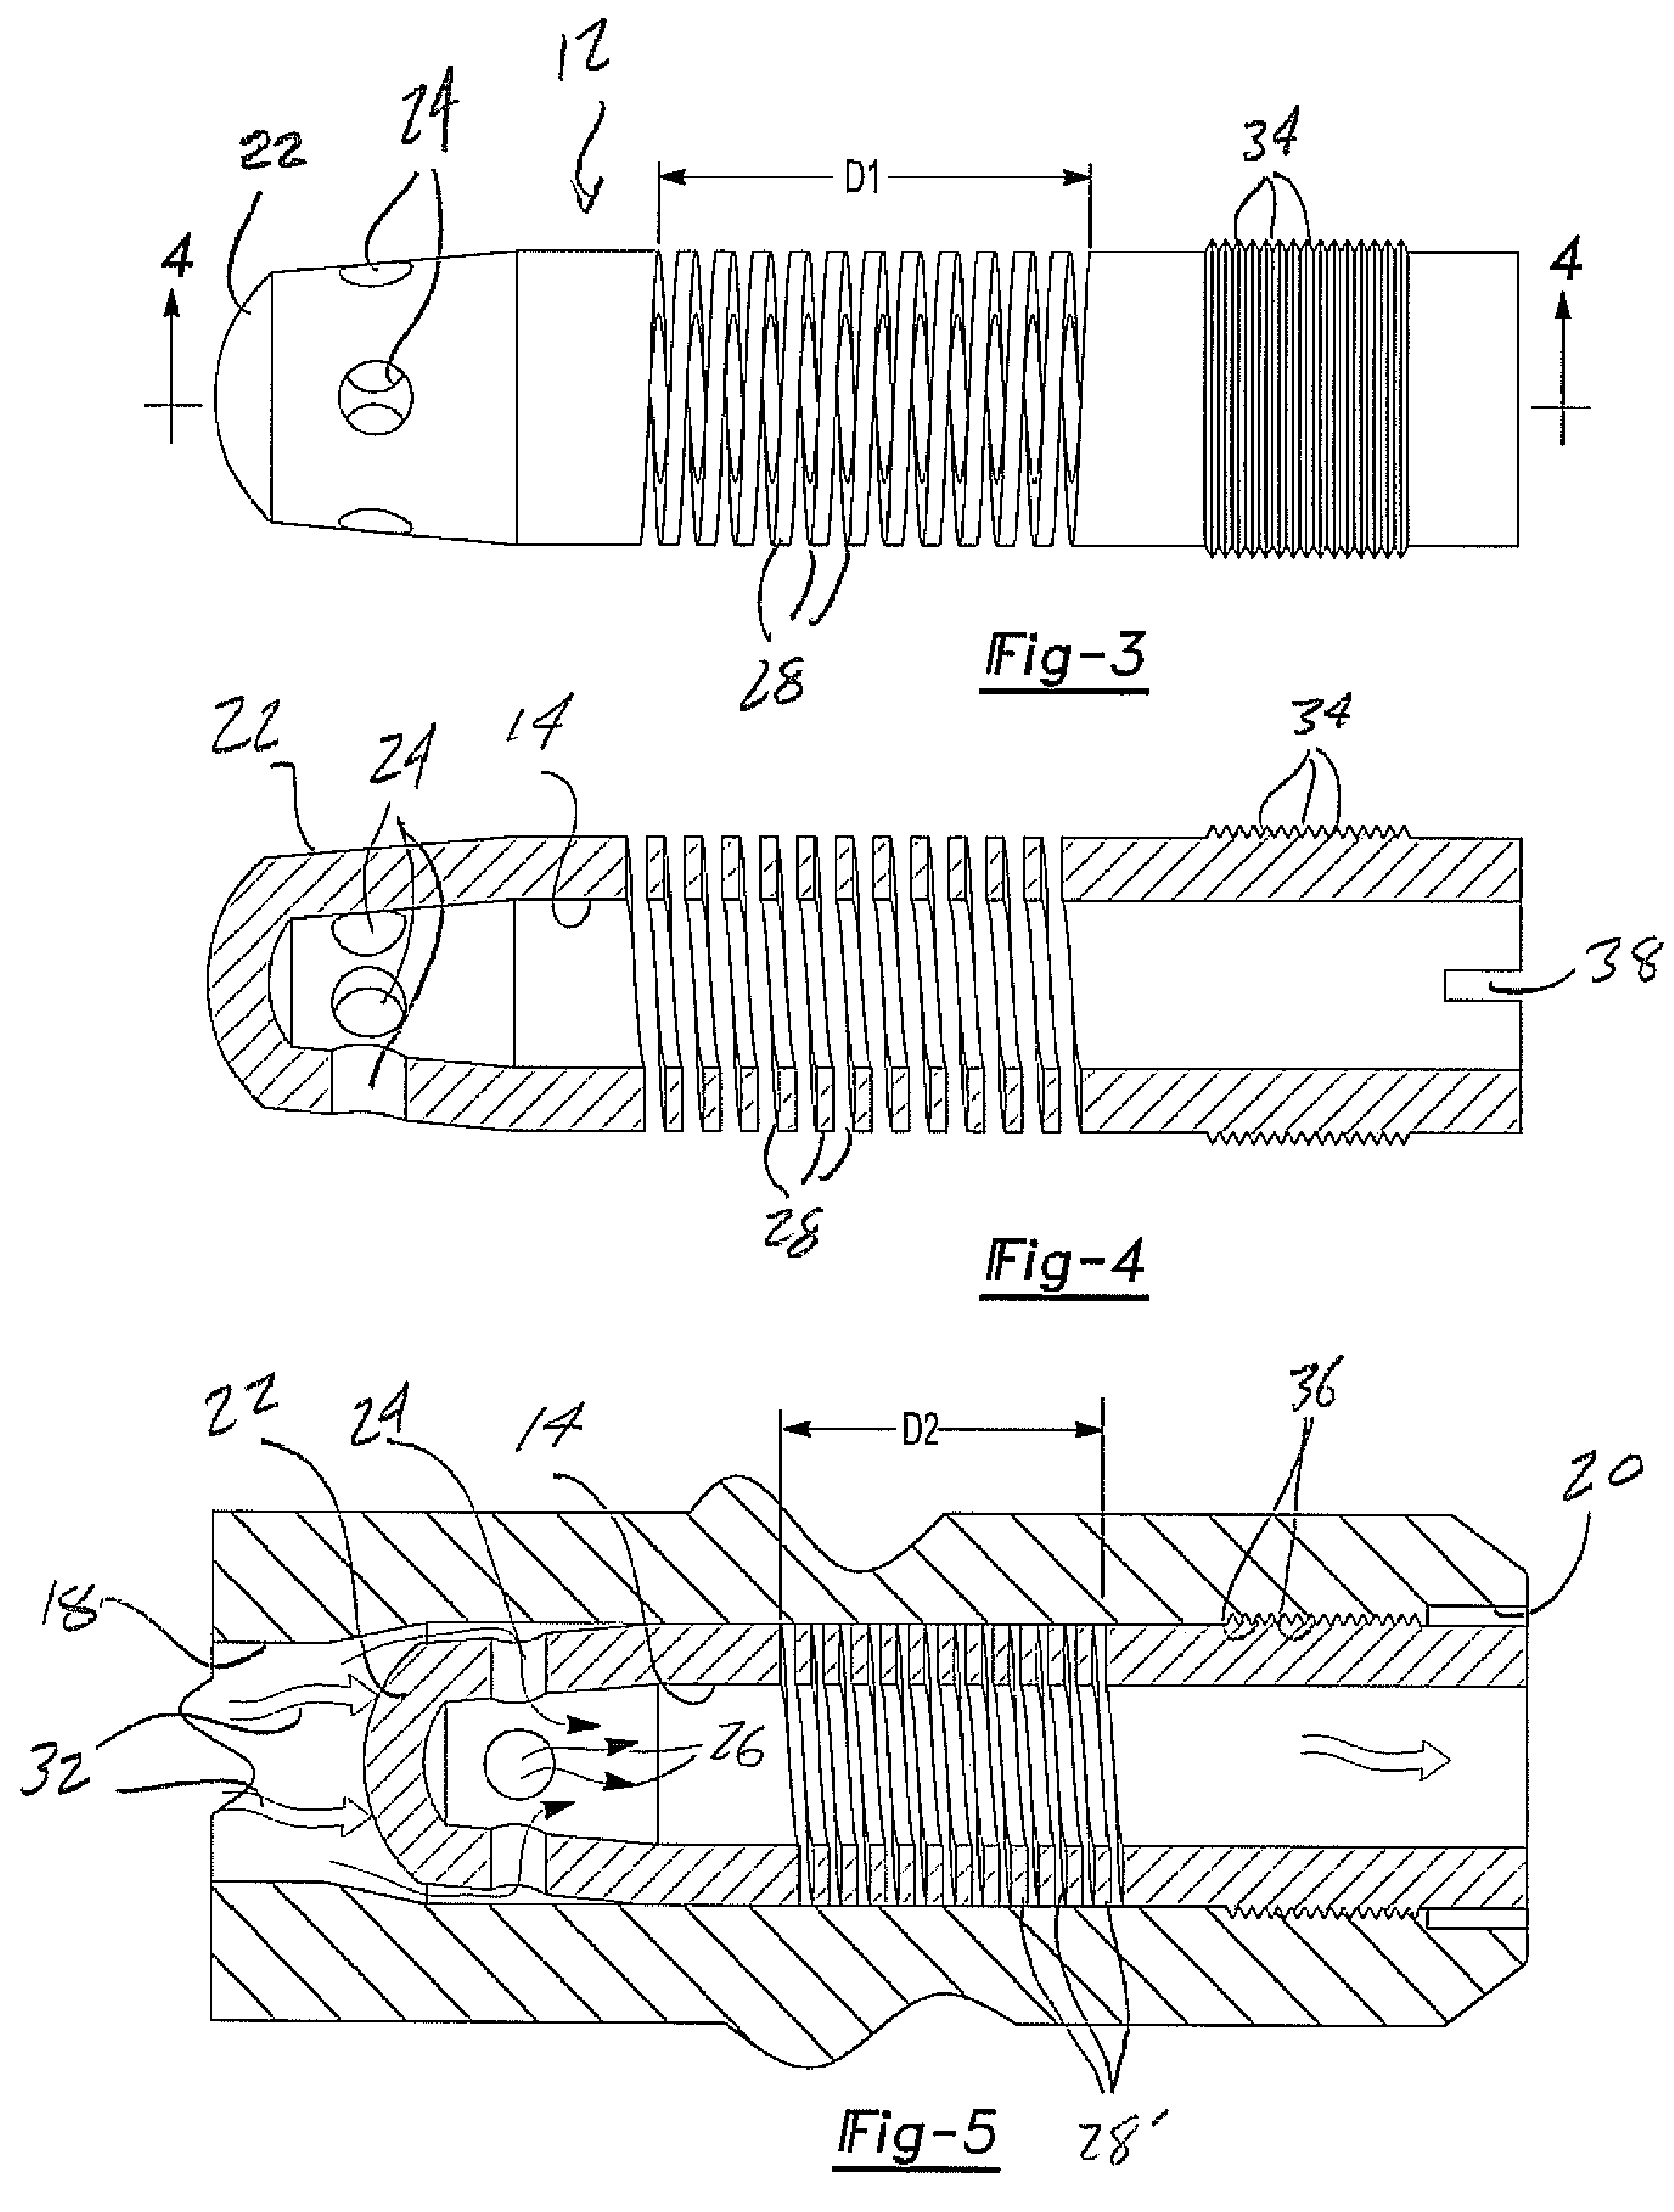 One-piece spring and poppet incorporated into a valve seat assembly and associated method for manufacturing a one-piece spring and poppet